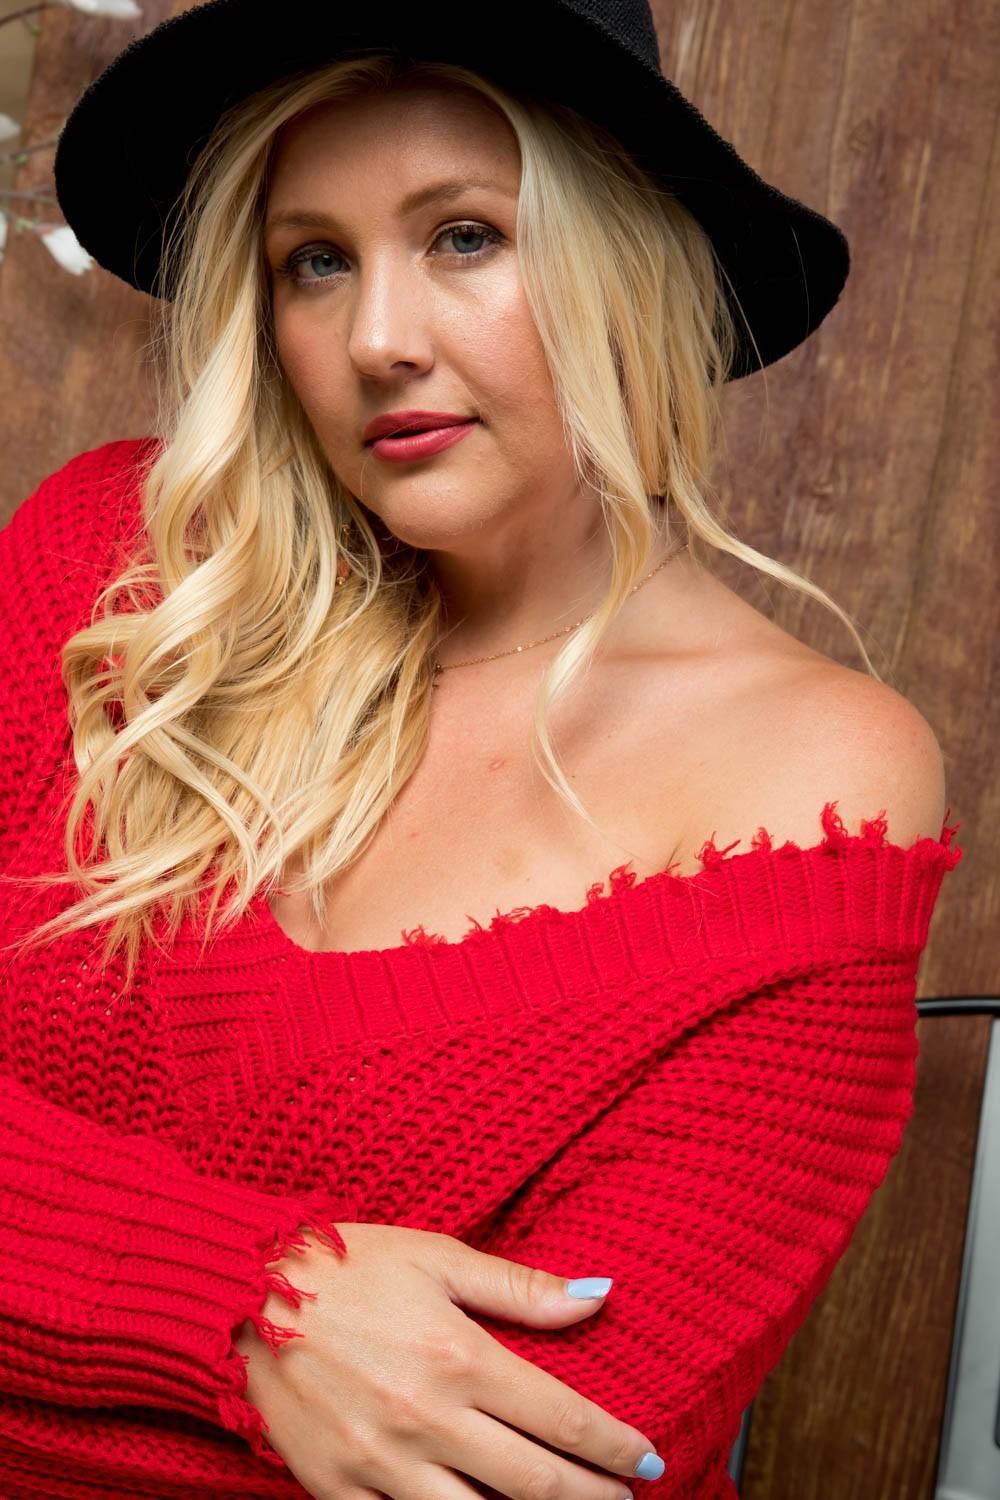 Red Distress Sweater Curvy - Mint Leafe Boutique 